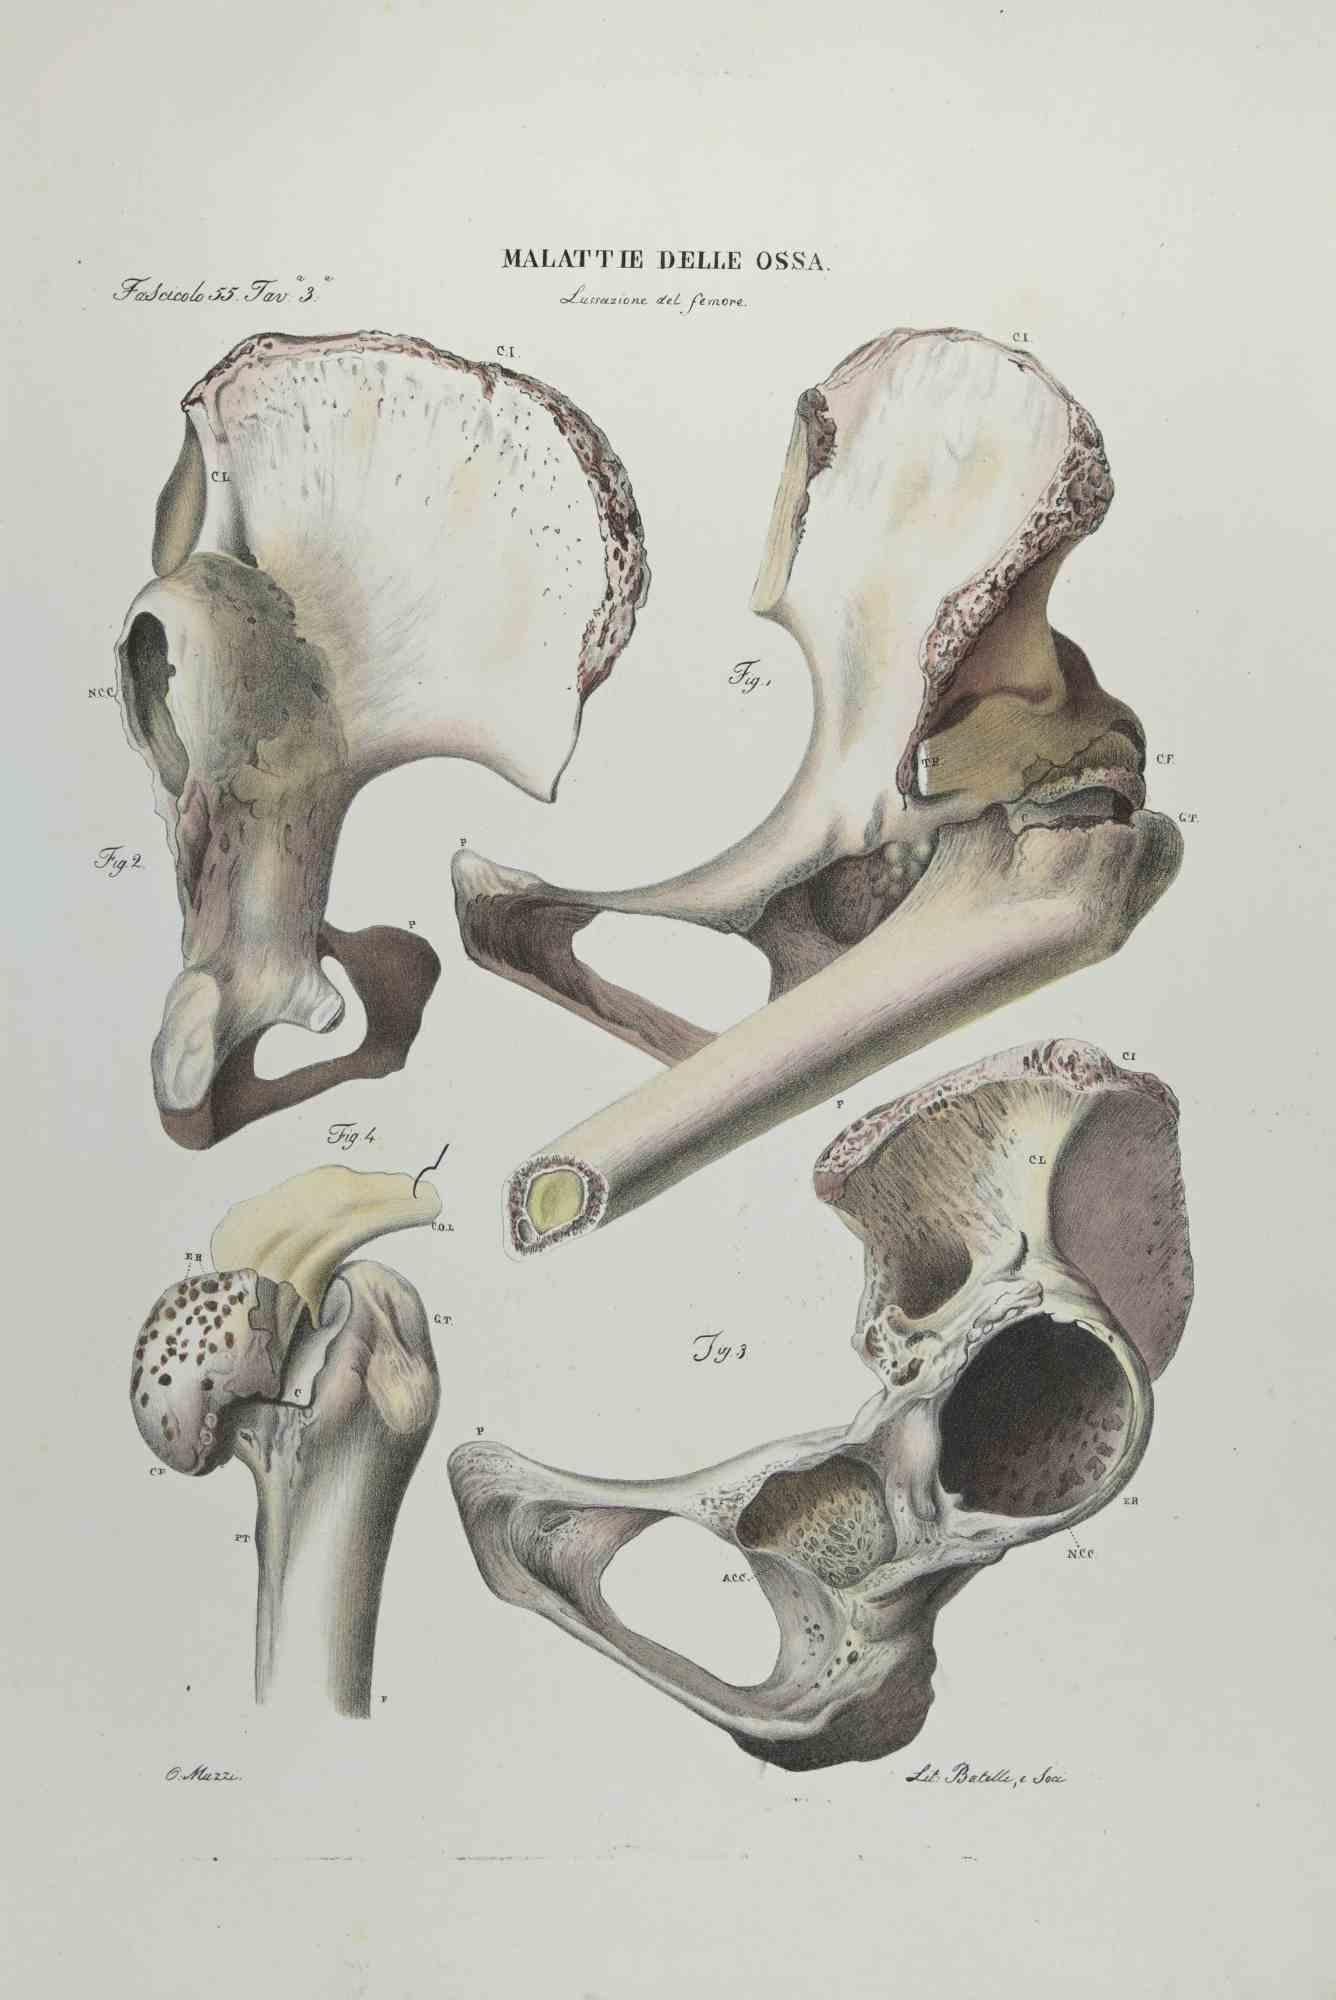 Bone Disease is a lithograph hand colored by Ottavio Muzzi for the edition of Antoine Chazal, Human Anatomy, Printers Batelli and Ridolfi, 1843.

The work belongs to the Atlante generale della anatomia patologica del corpo umano by Jean CRUVEILHIER,